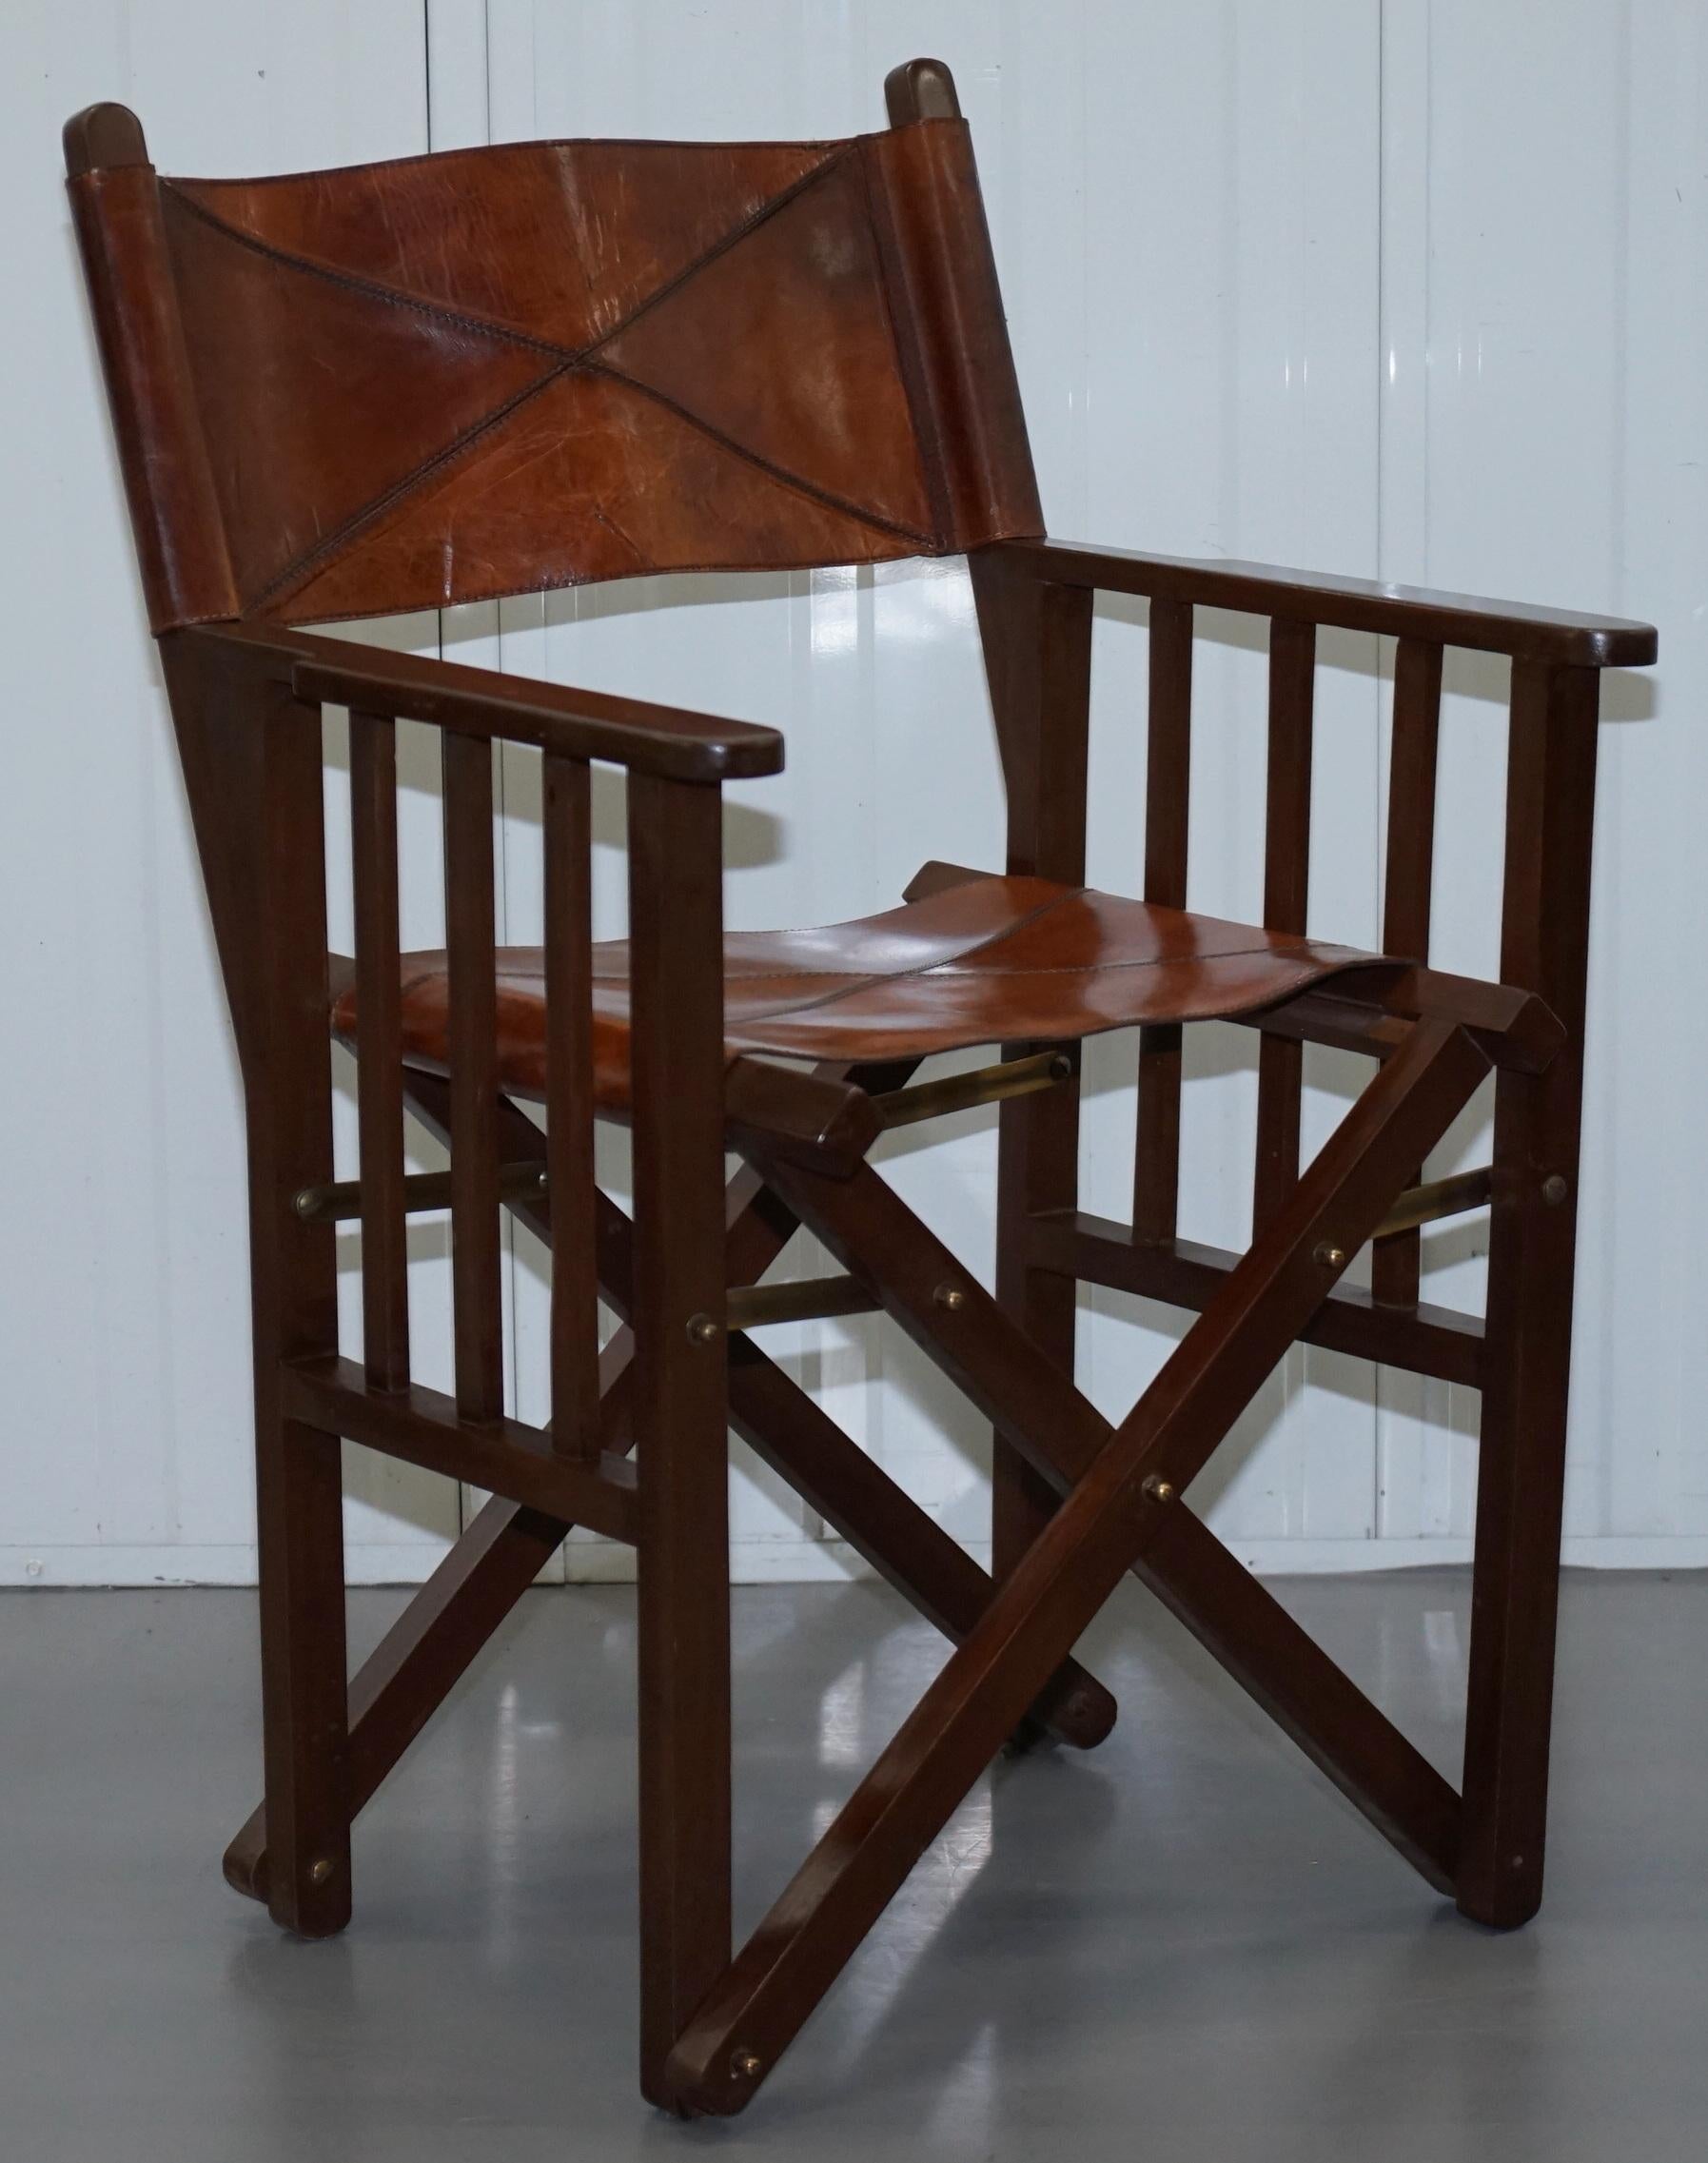 We are delighted to offer for sale this stunning set of six Directors armchairs with aged brown leather that fold away

A very good looking and well made set, they all fold away as mentioned, ideally used as occasional or dining chairs, they are